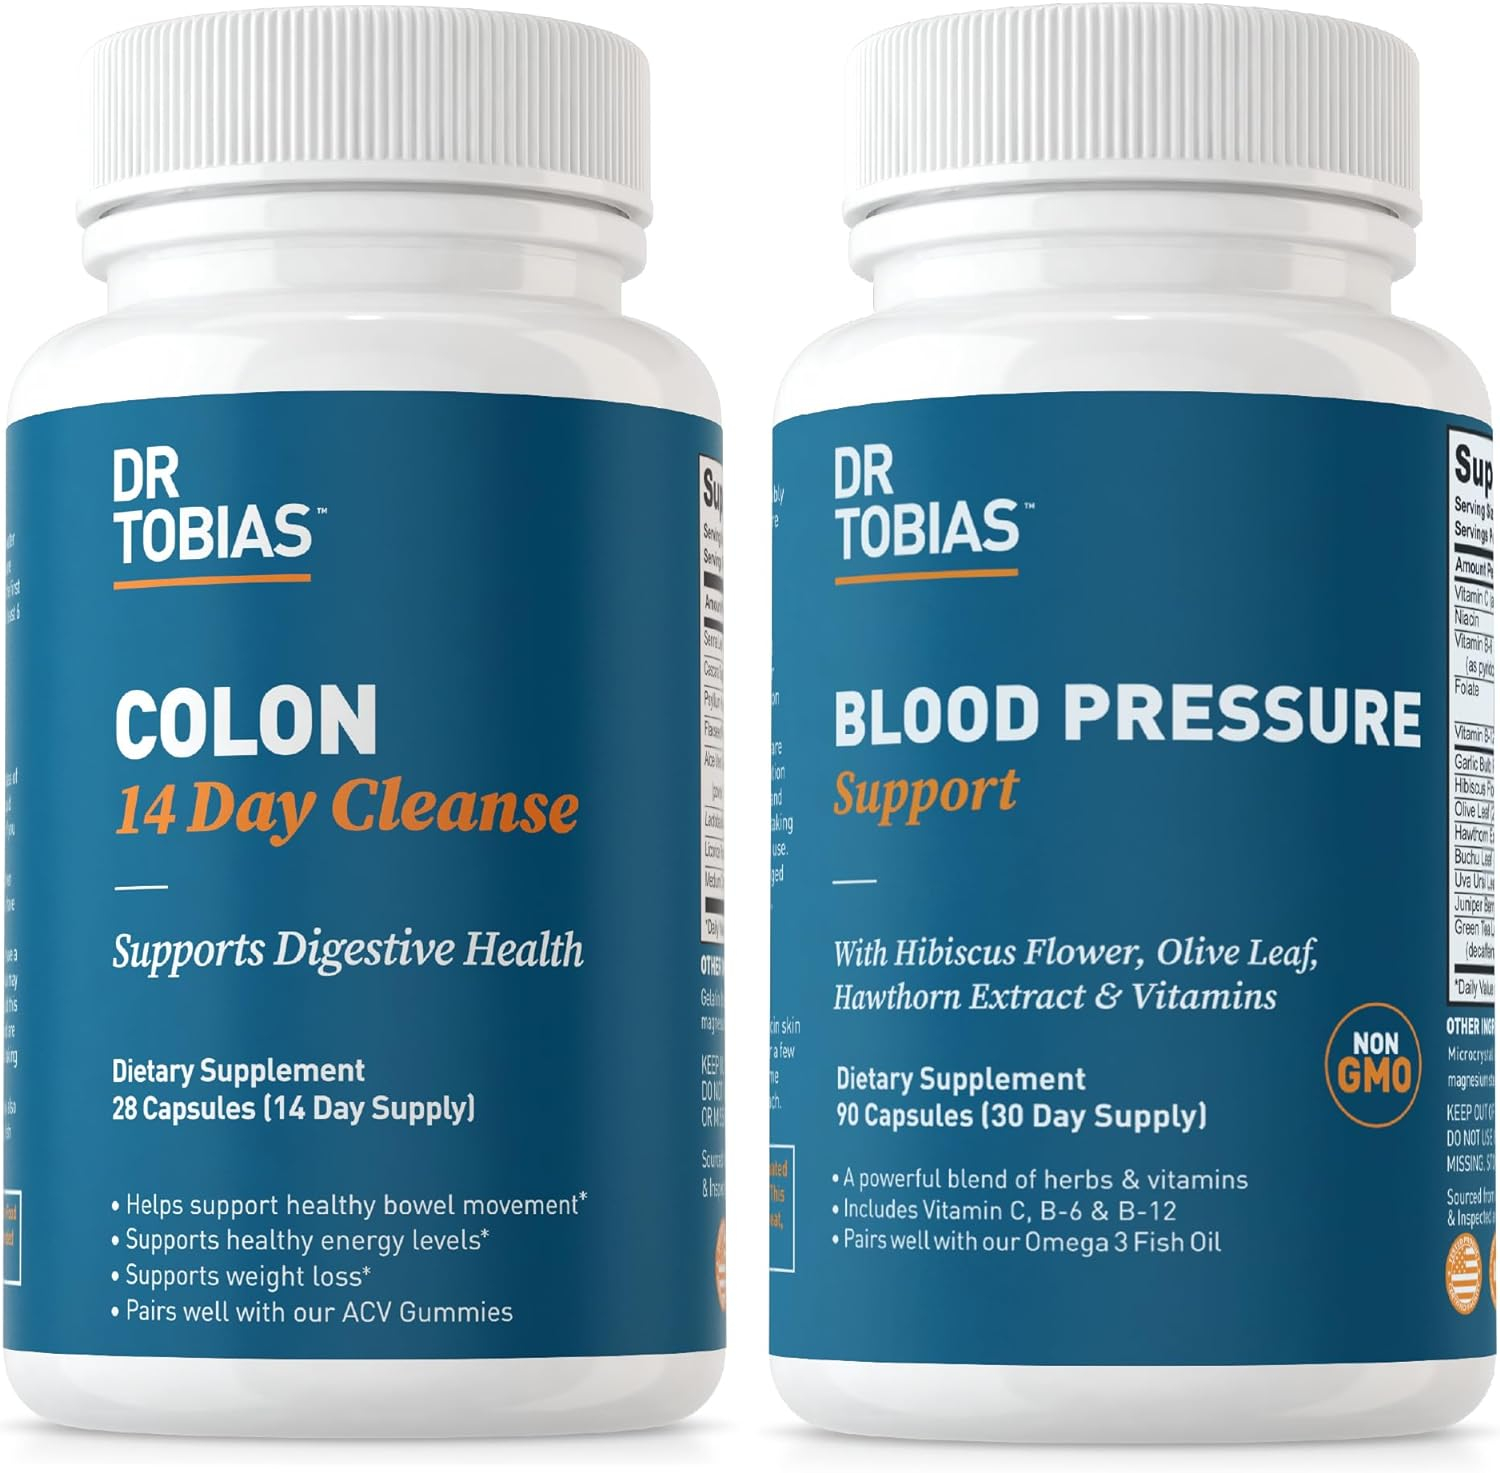 Dr. Tobias Colon 14 Day Cleanse and Blood Pressure Support with Fiber, Herbs  Probiotics, Hawthorn, Hibiscus Flower, Supports Gut and Circulatory Health